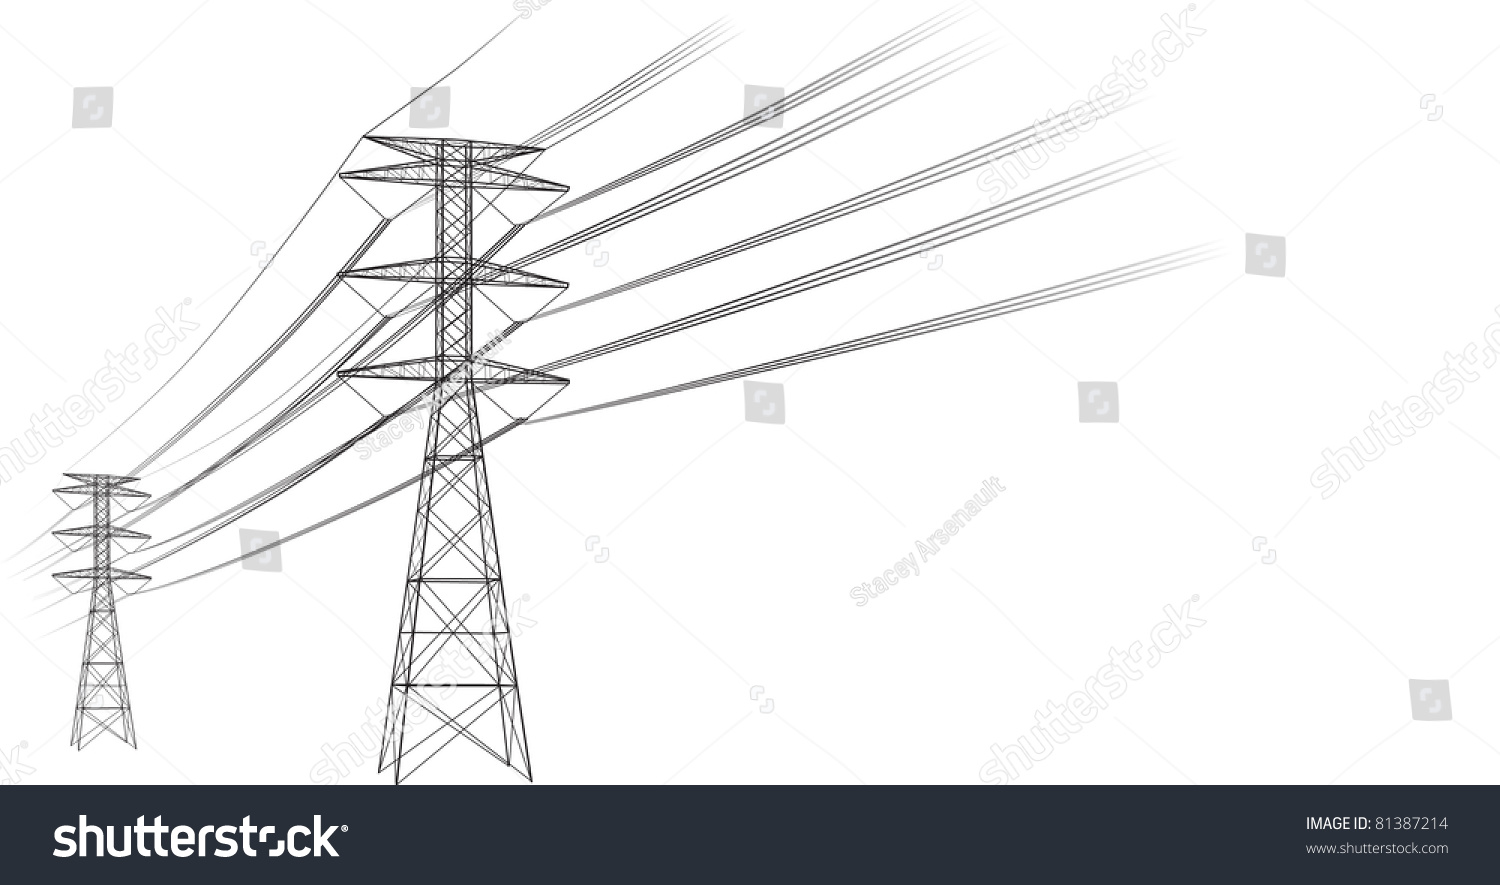 clipart power lines - photo #41